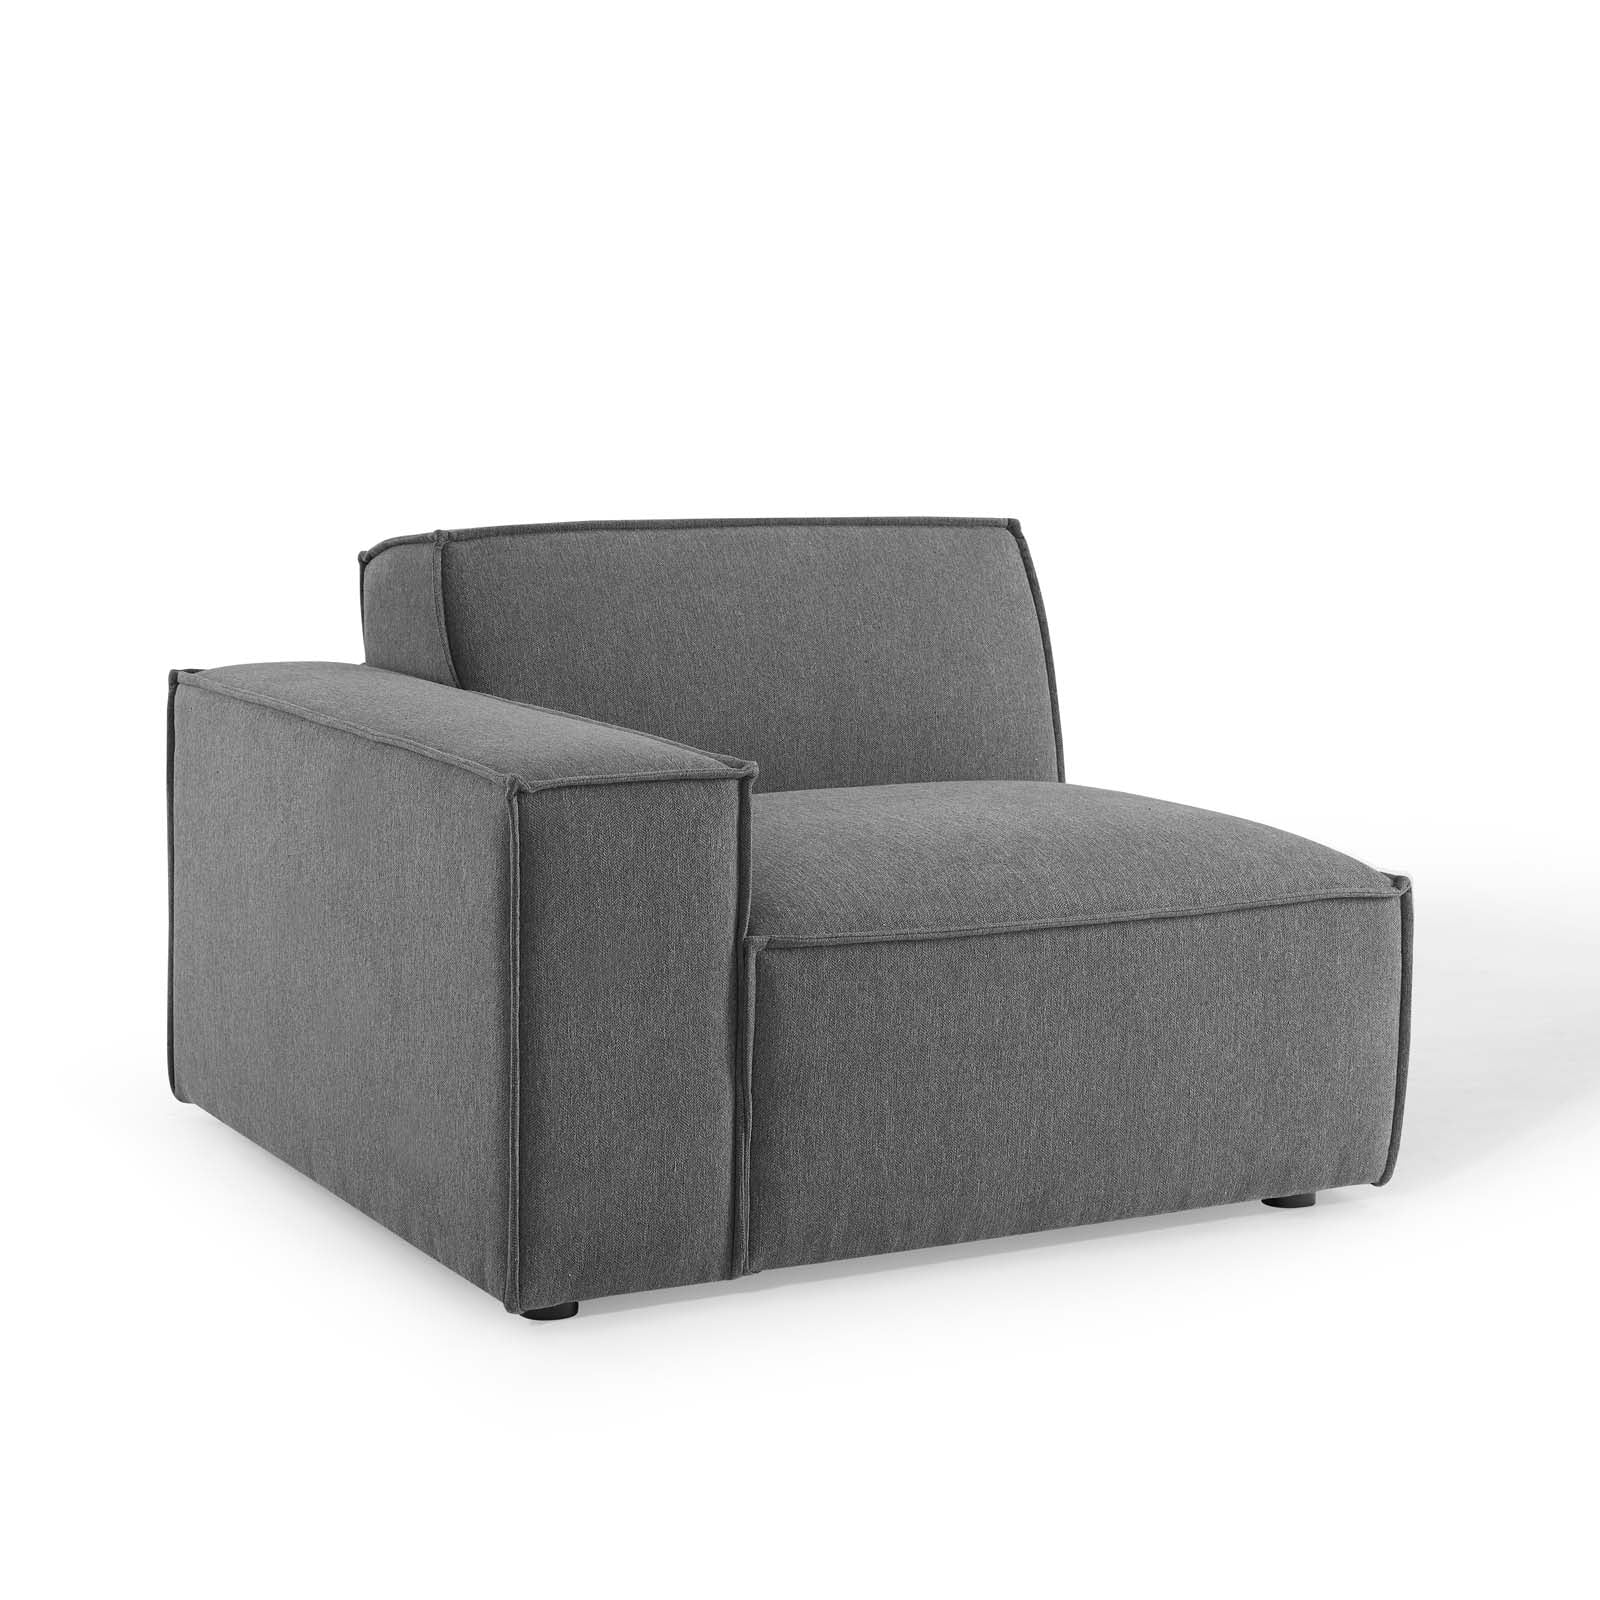 Modway Sofas & Couches - Restore 2-Piece Sofa Charcoal